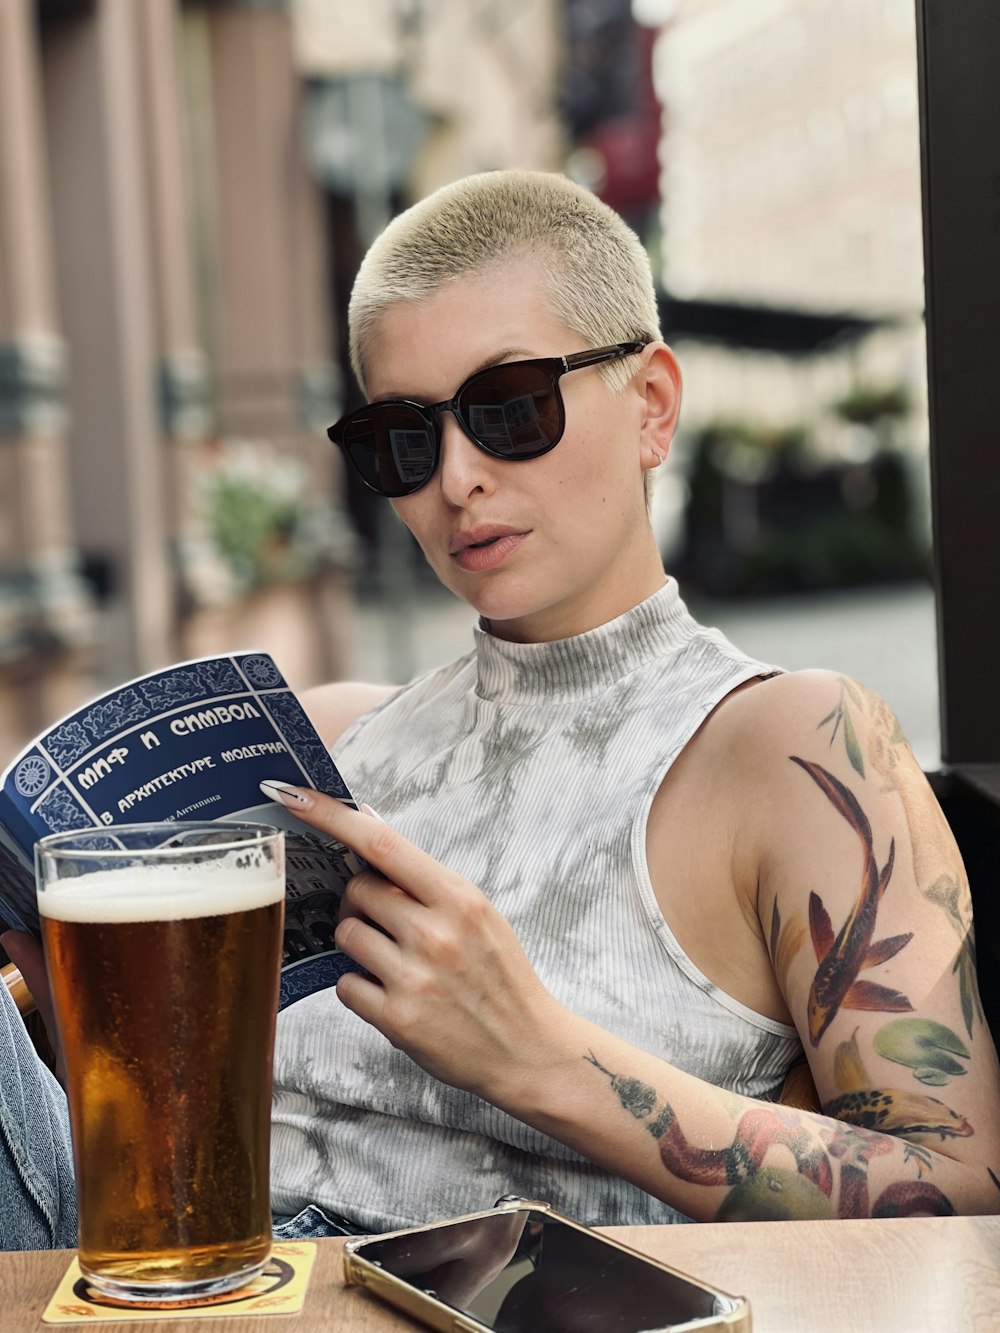 a person wearing sunglasses and sitting at a table with a glass of beer